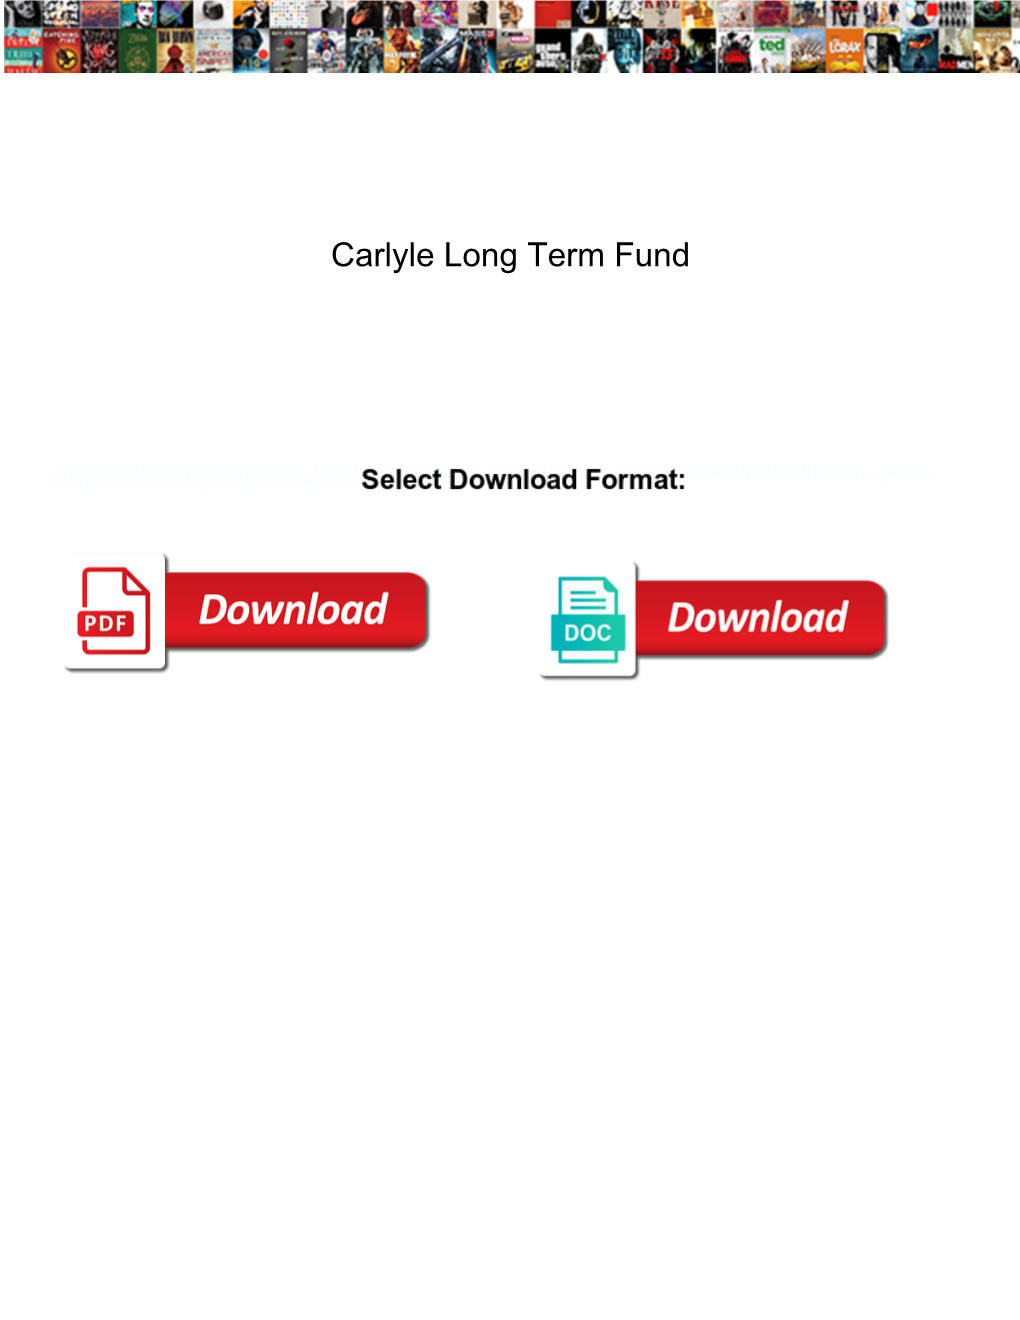 Carlyle Long Term Fund